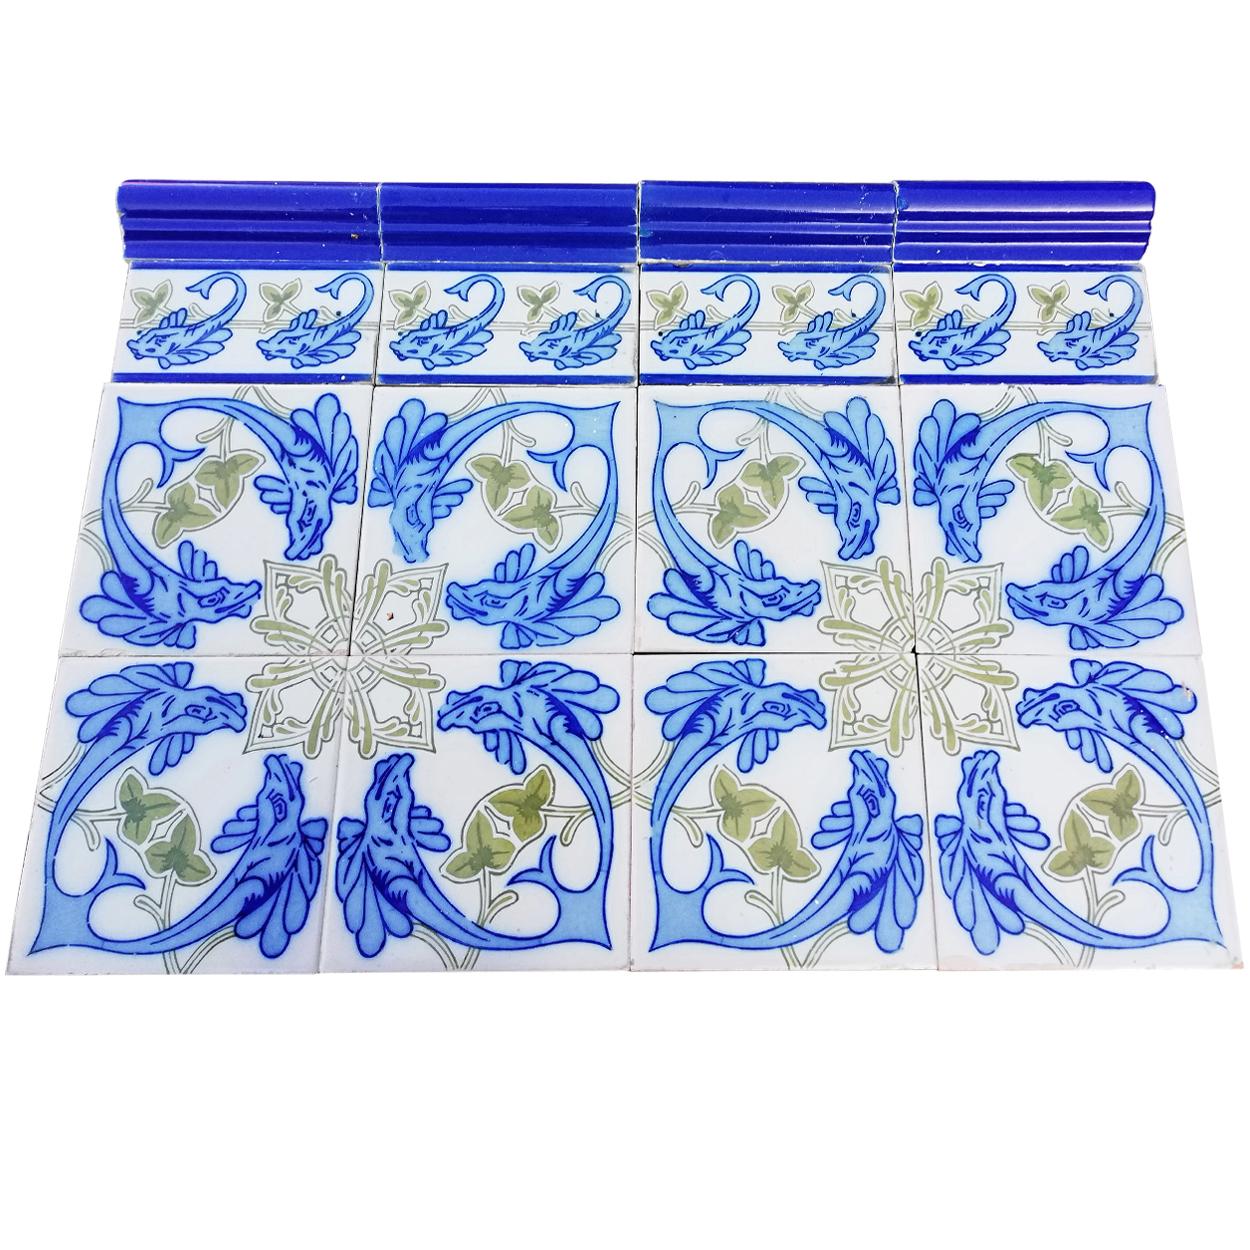 Early 20th Century Set of Unique Antique 32 Ceramic Tiles with Fisch by Onda, Spain, circa 1900 For Sale